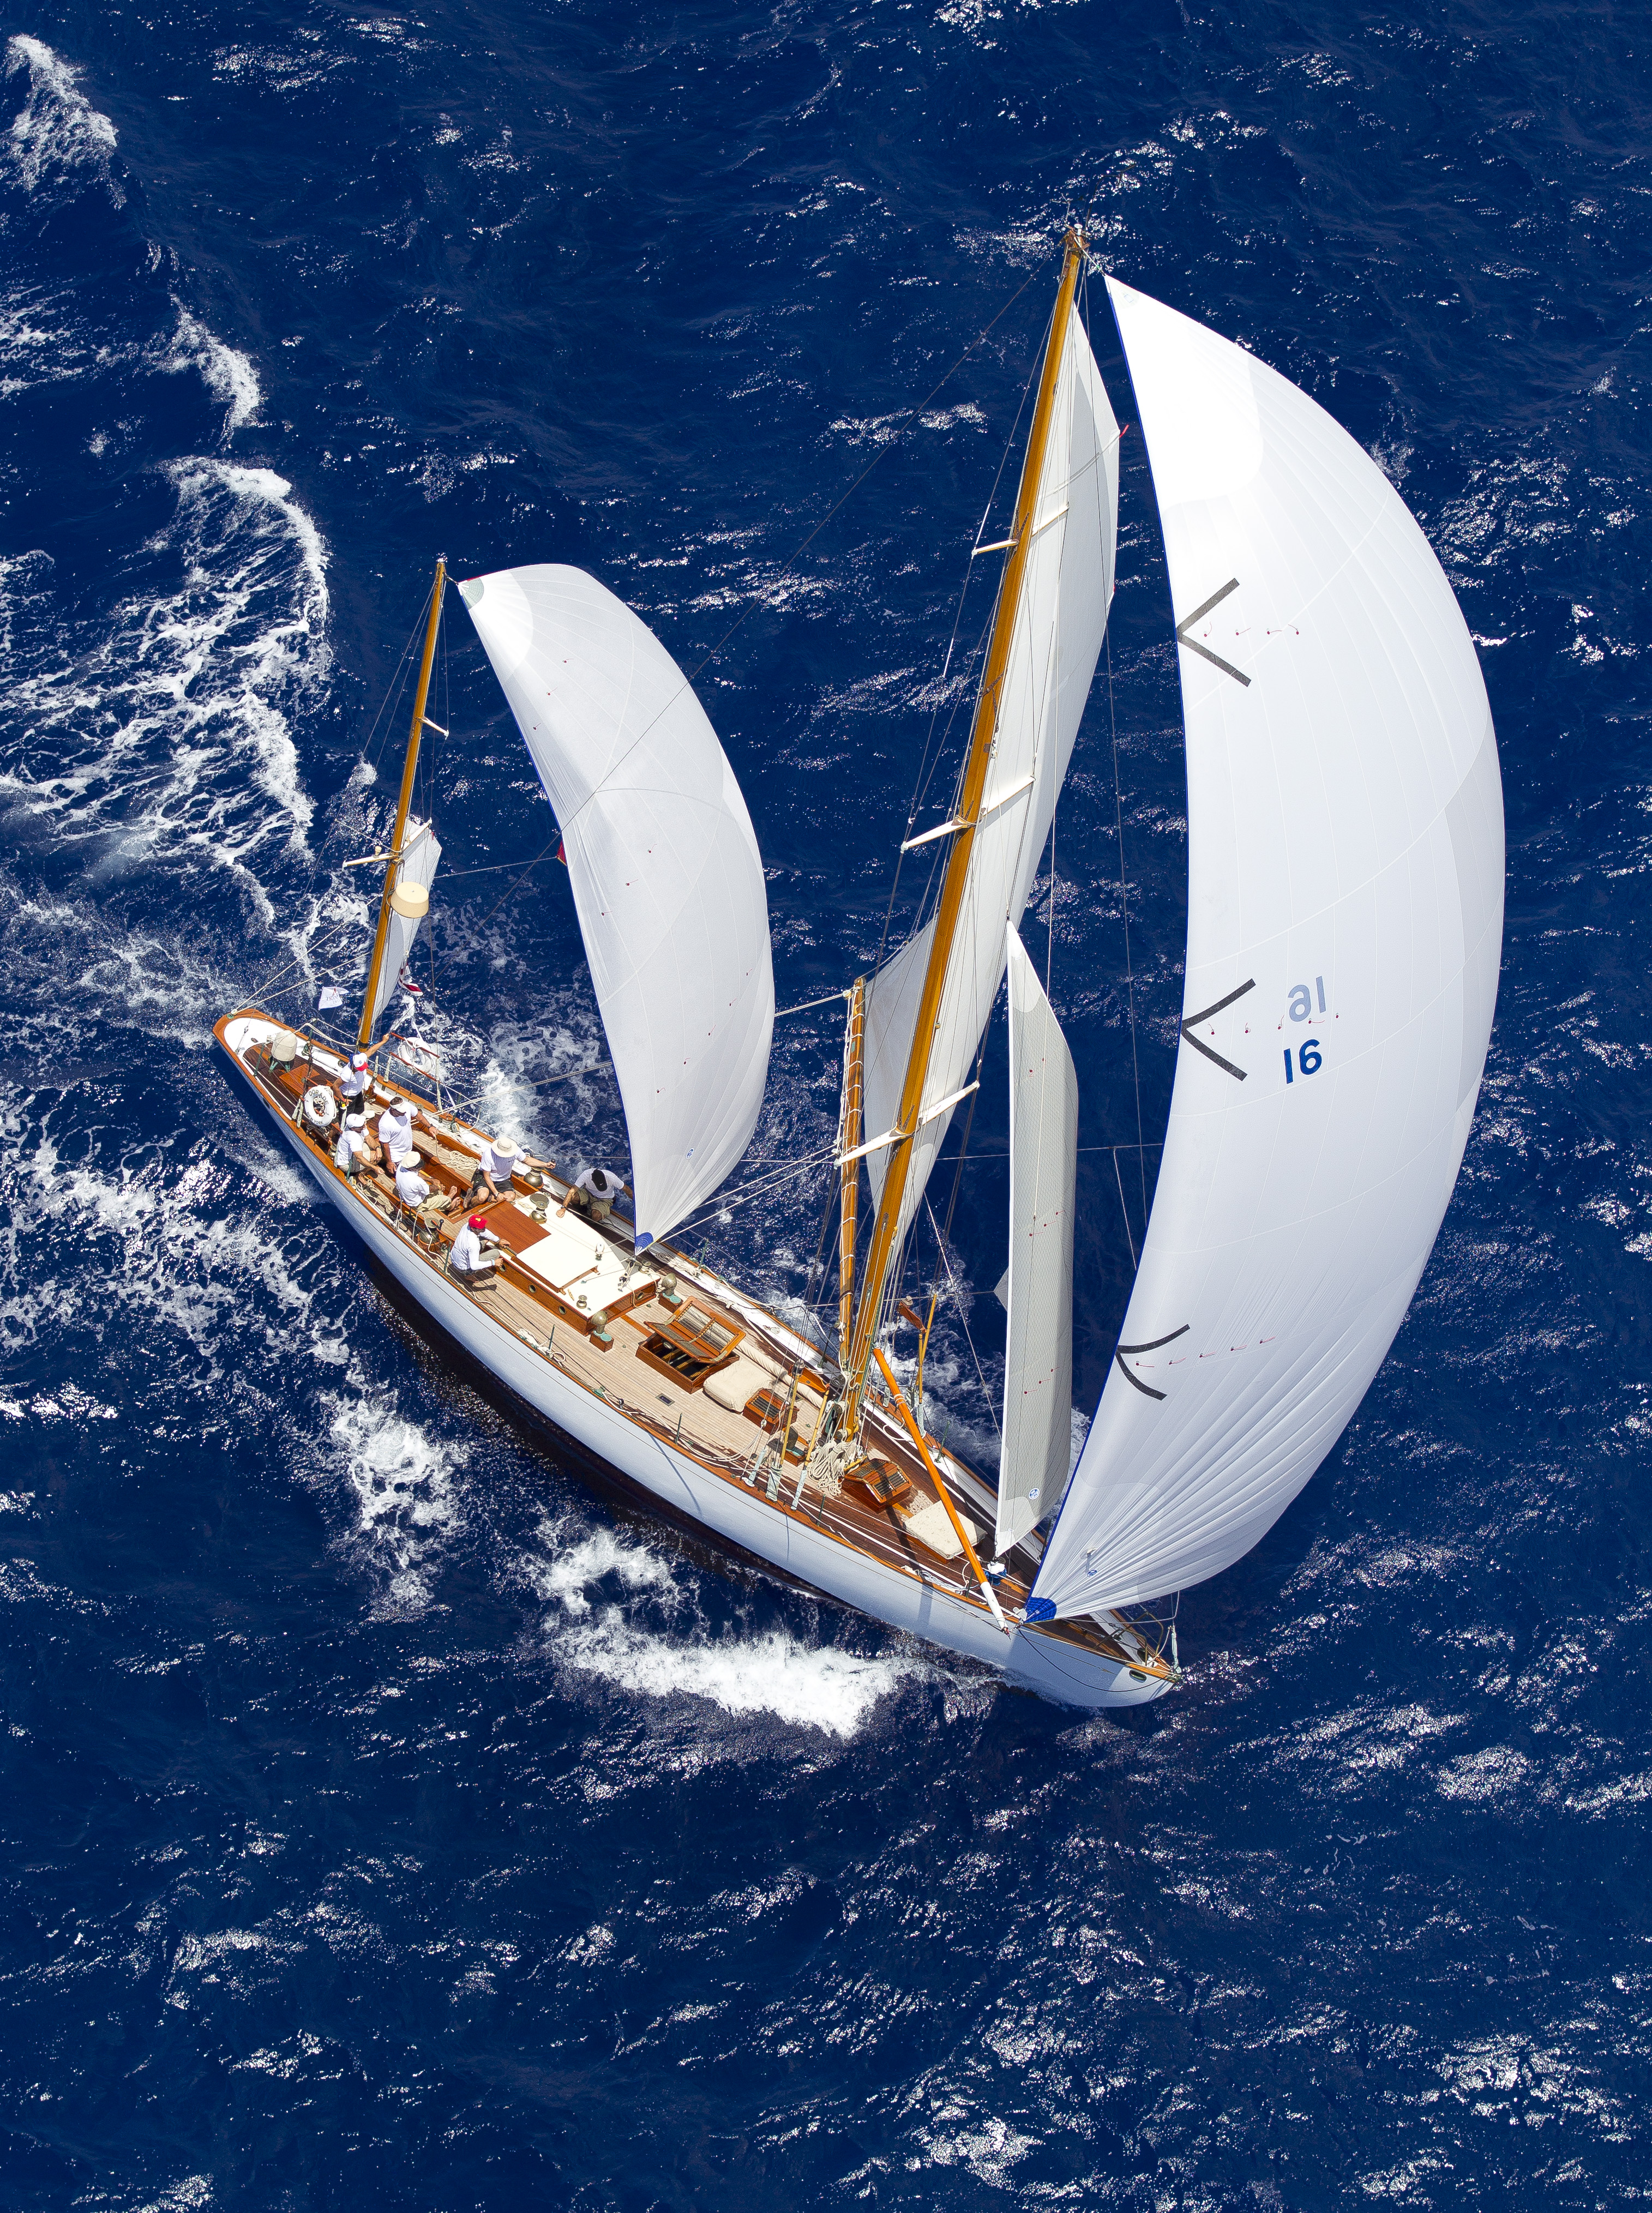 After the Rolex Fastnet in August, the 52-foot yawl Dorade… Read the rest